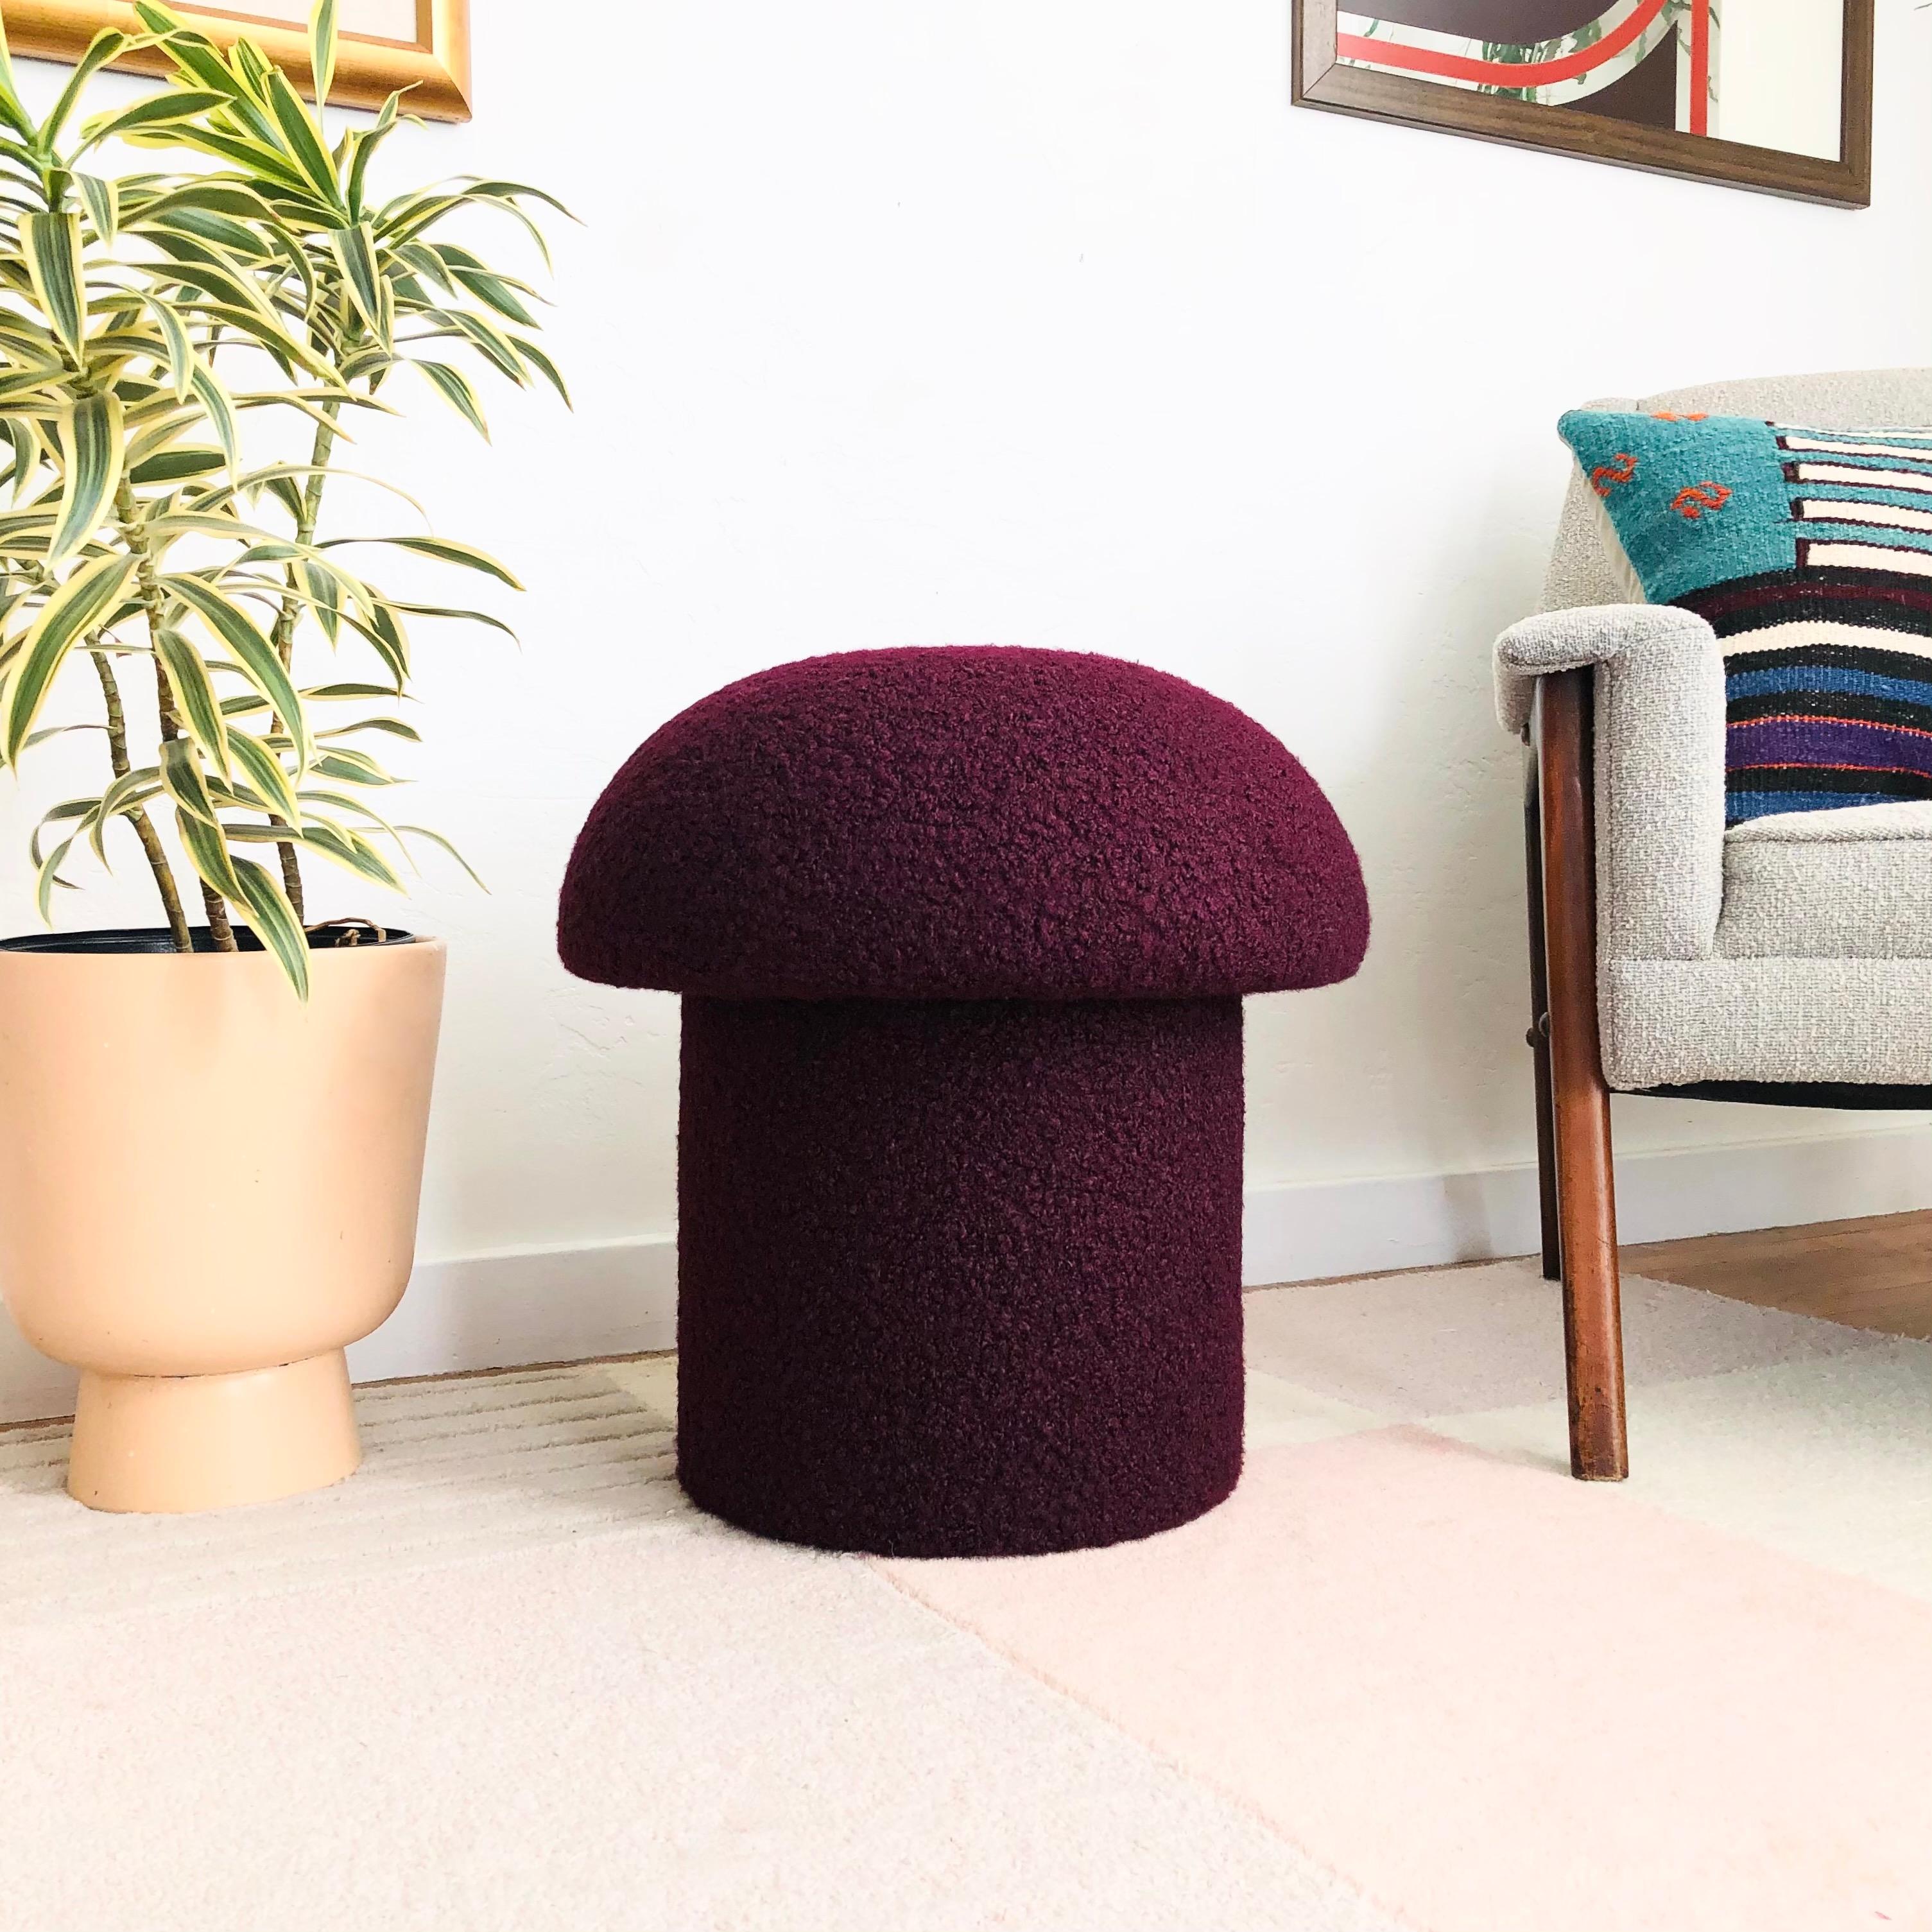 A handmade mushroom shaped ottoman, upholstered in a plum colored curly boucle fabric. Perfect for using as a footstool or extra occasional seating. A comfortable cushioned seat and sculptural accent piece.
Mushroom ottomans are made to order,